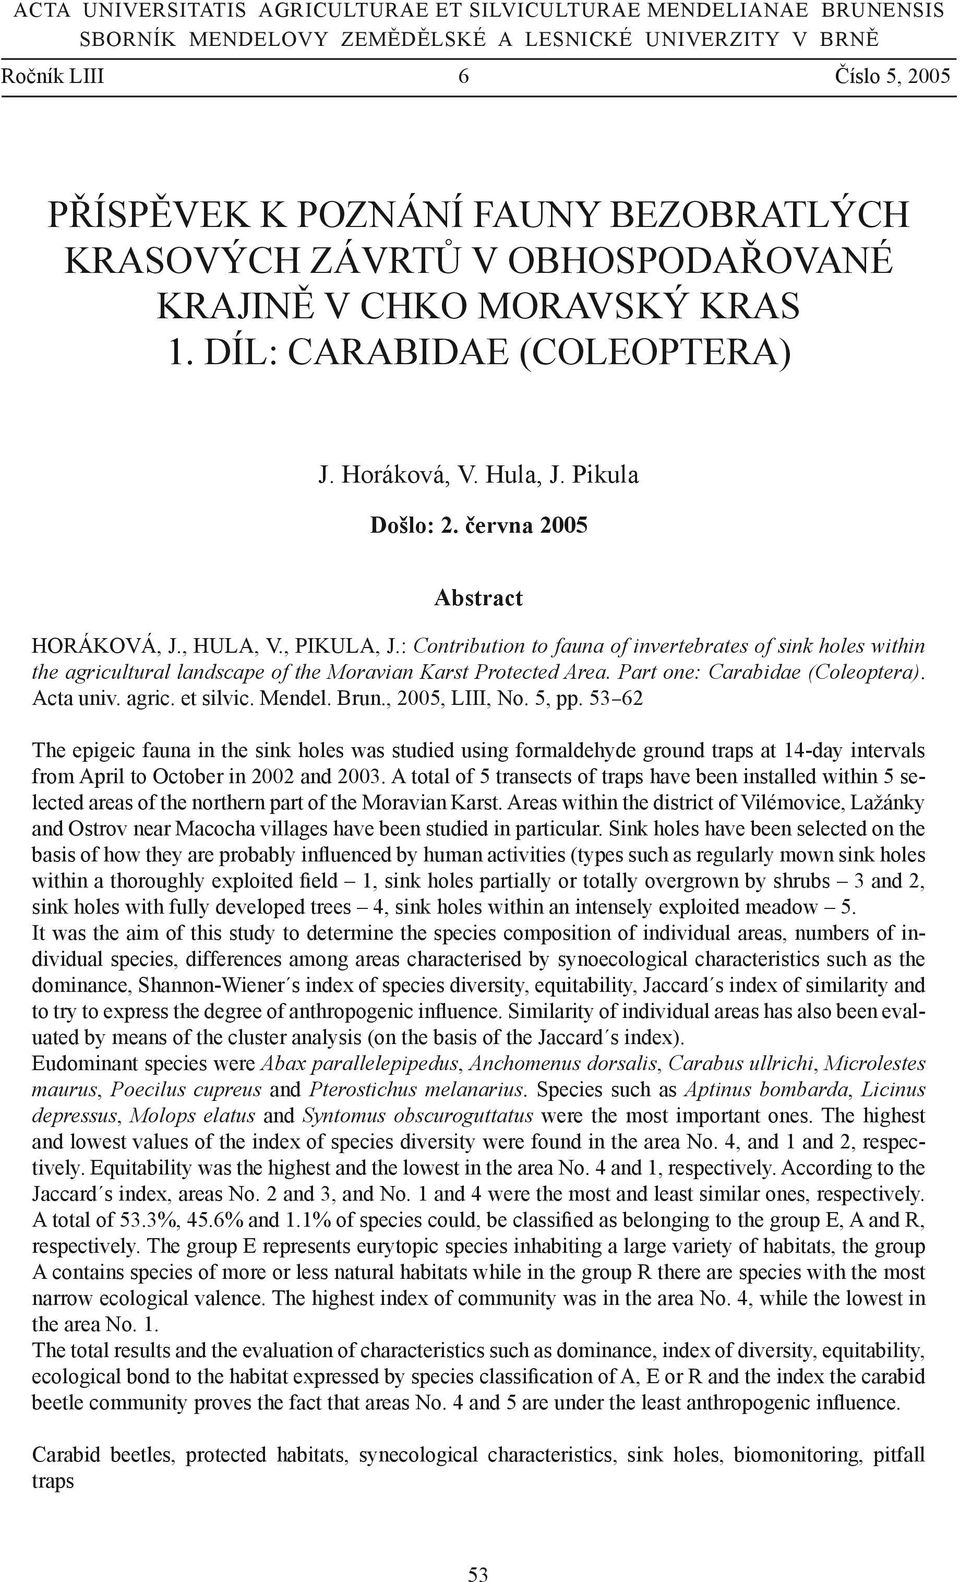 : Contribution to fauna of invertebrates of sink holes within the agricultural landscape of the Moravian Karst Protected Area. Part one: Carabidae (Coleoptera). Acta univ. agric. et silvic. Mendel.